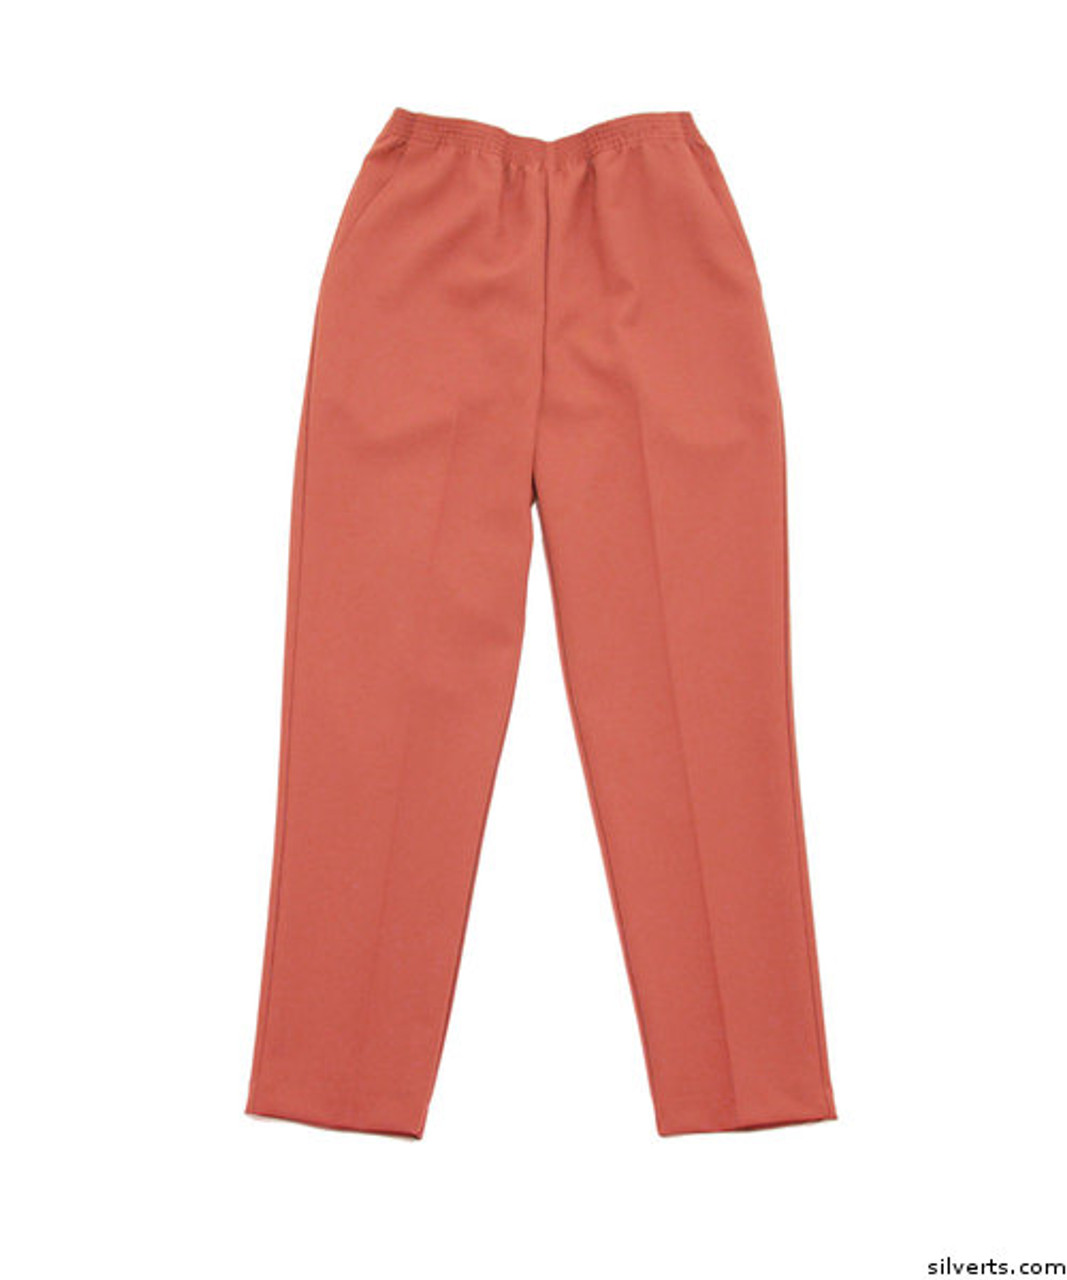 Silvert's 130900602 Womens Elastic Waist Polyester Pants 2 Pockets , Size 10, SEA CORAL